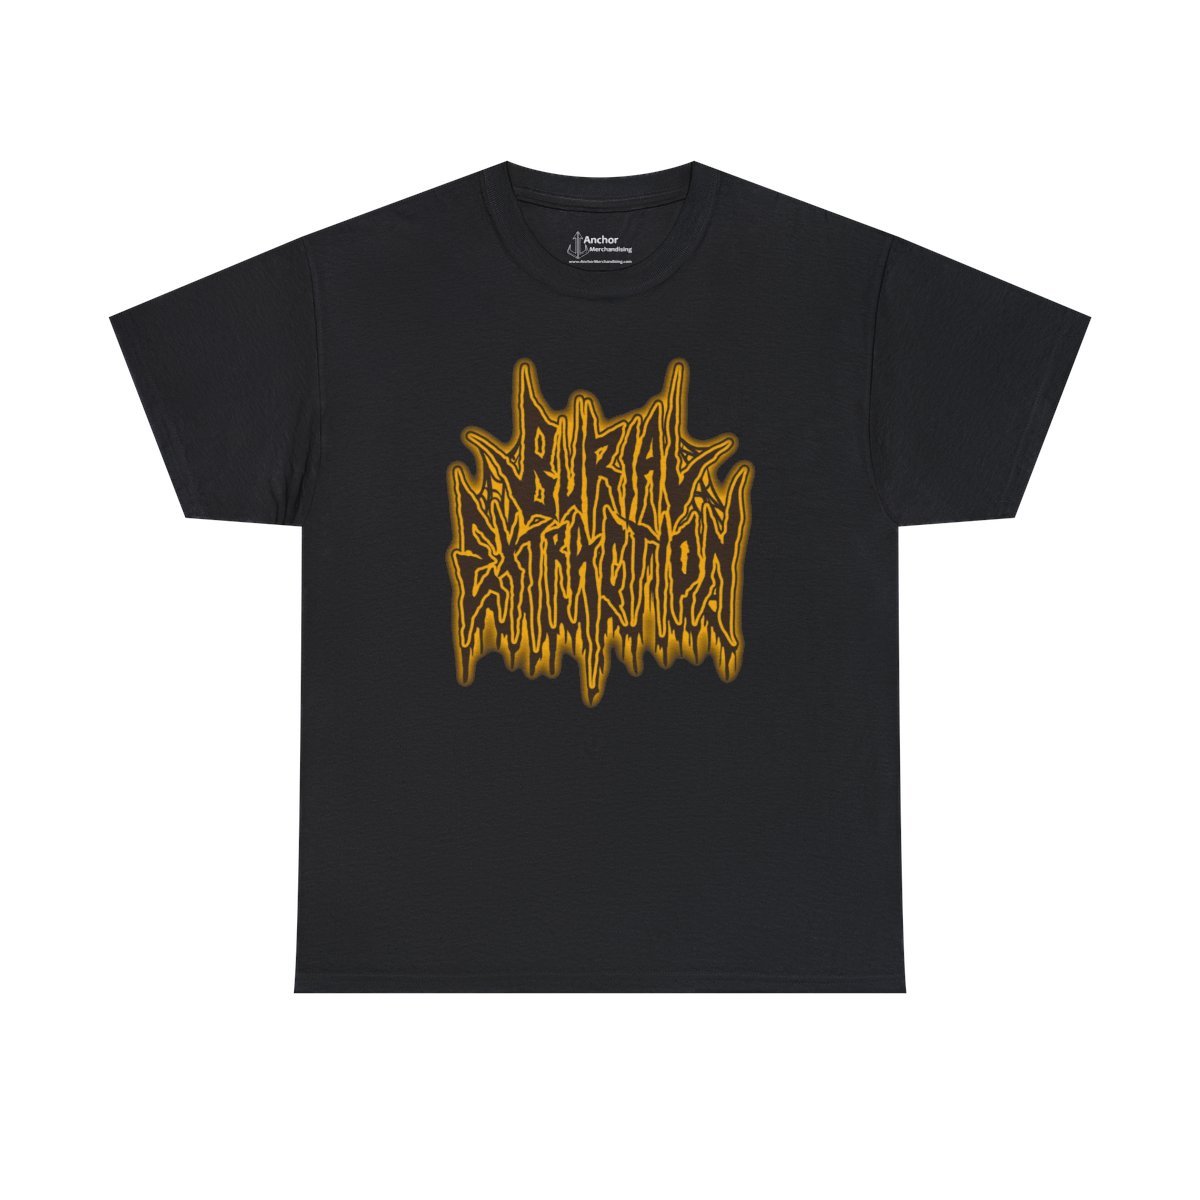 Burial Extraction – A Shadow Of Things To Come Logo Short Sleeve Tshirt